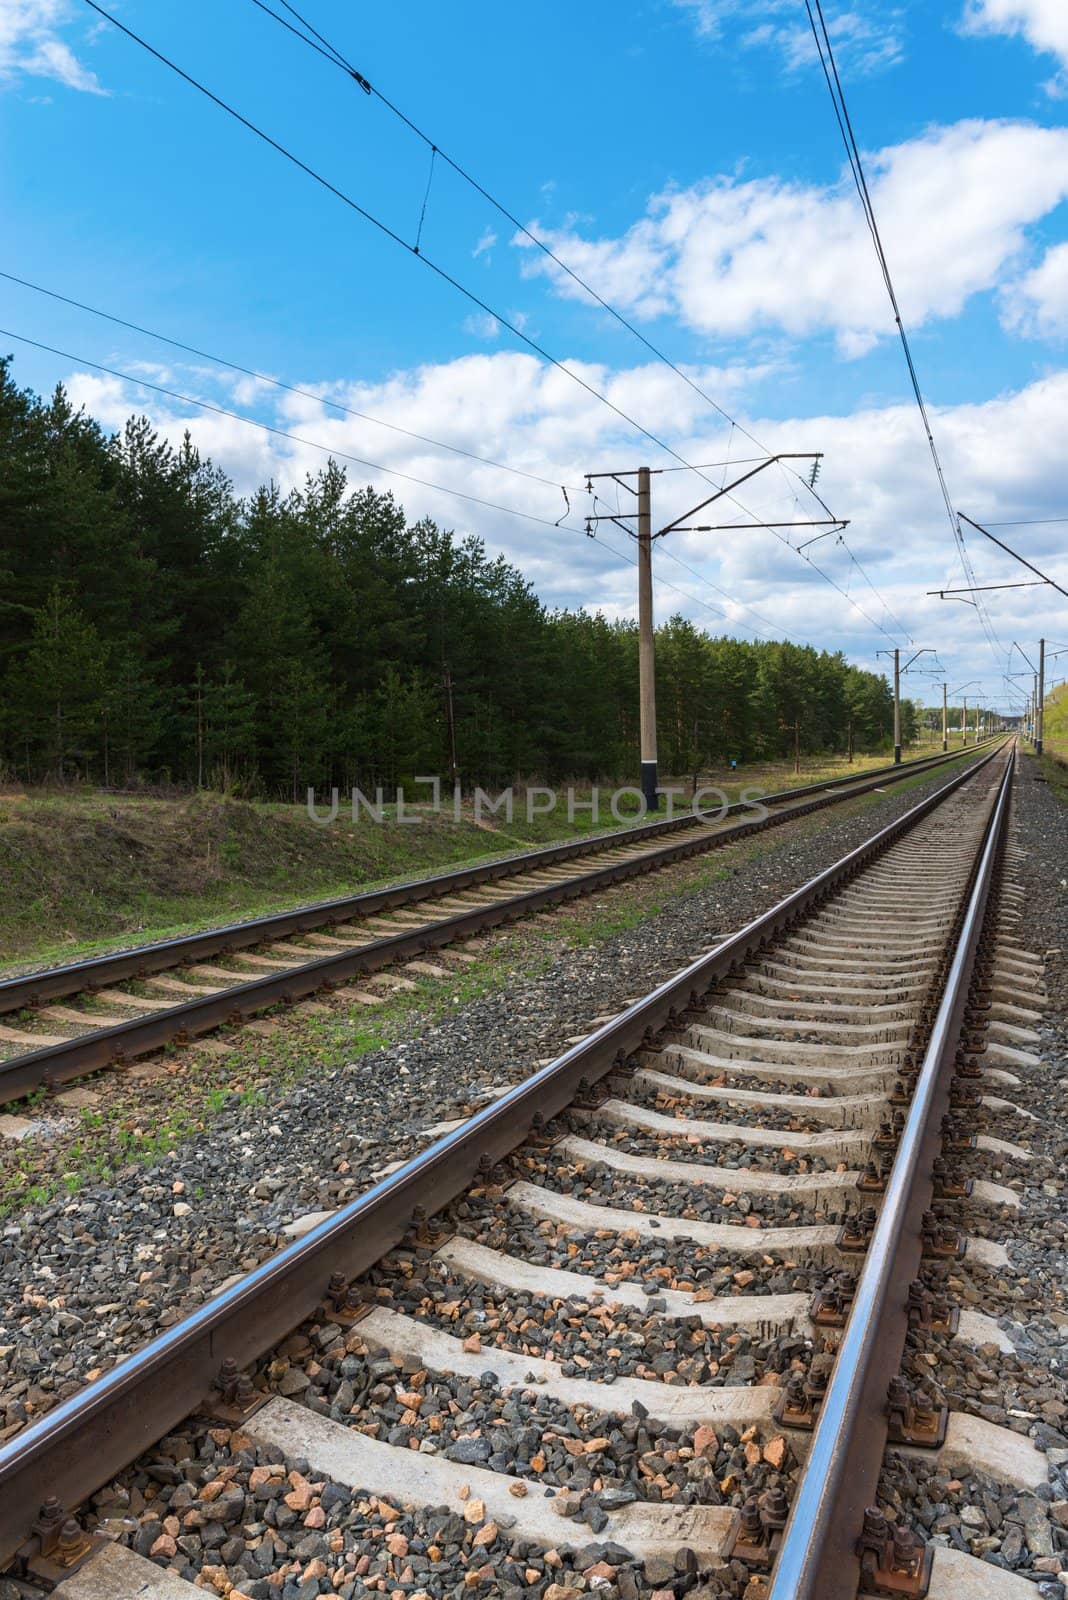 Railway with electric cables and blue sky. Focus on the front rail.